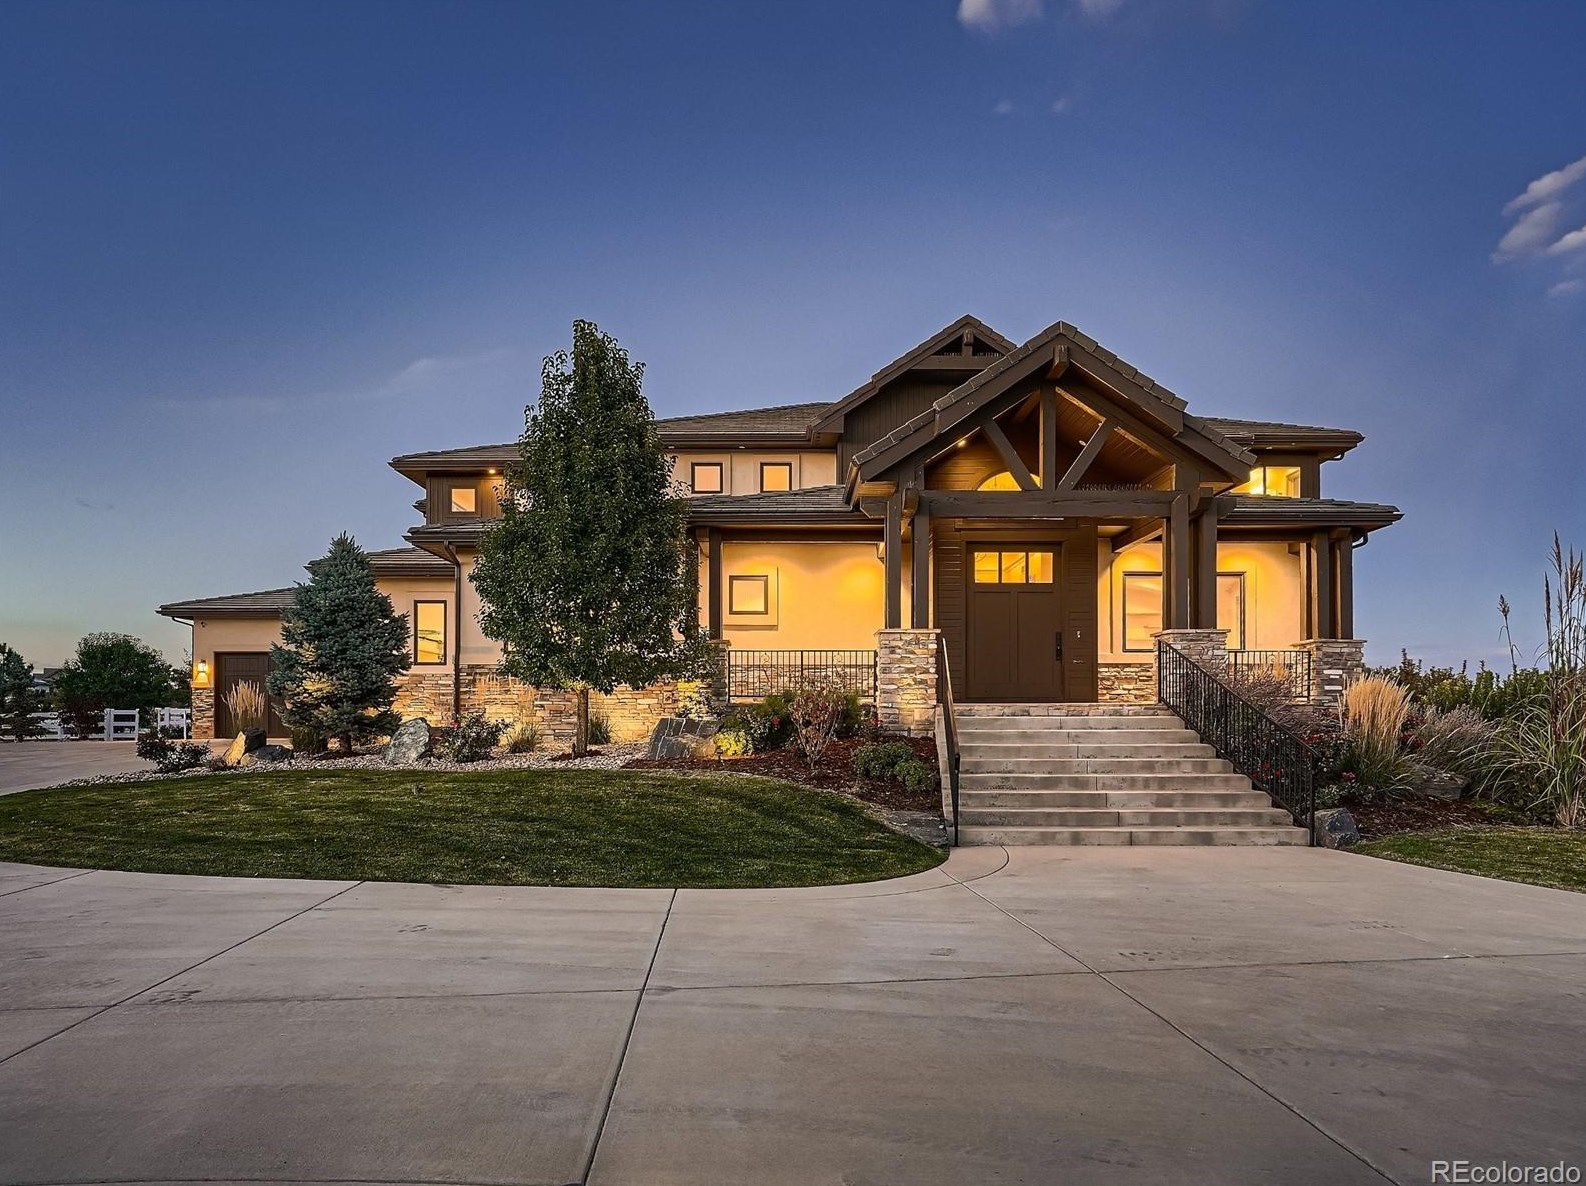 2635 Spruce Meadows Dr, Westminster, CO 80023